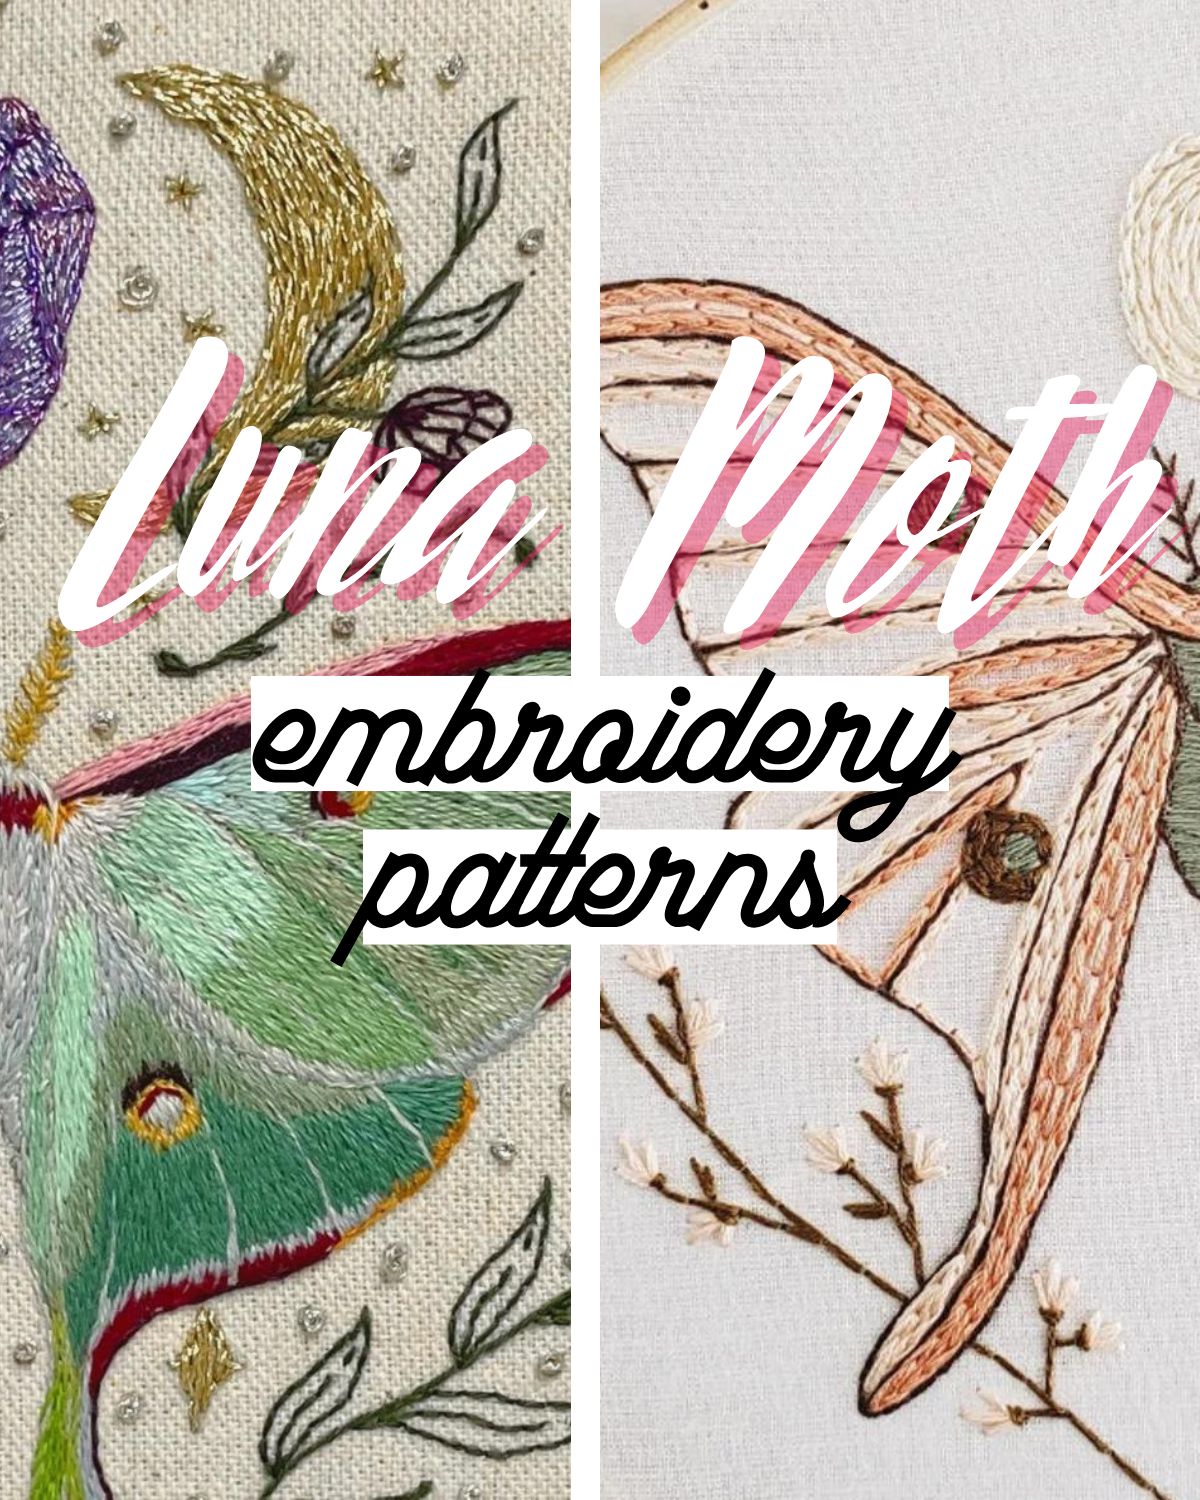 Two embroidery pieces with celestial and natural themes